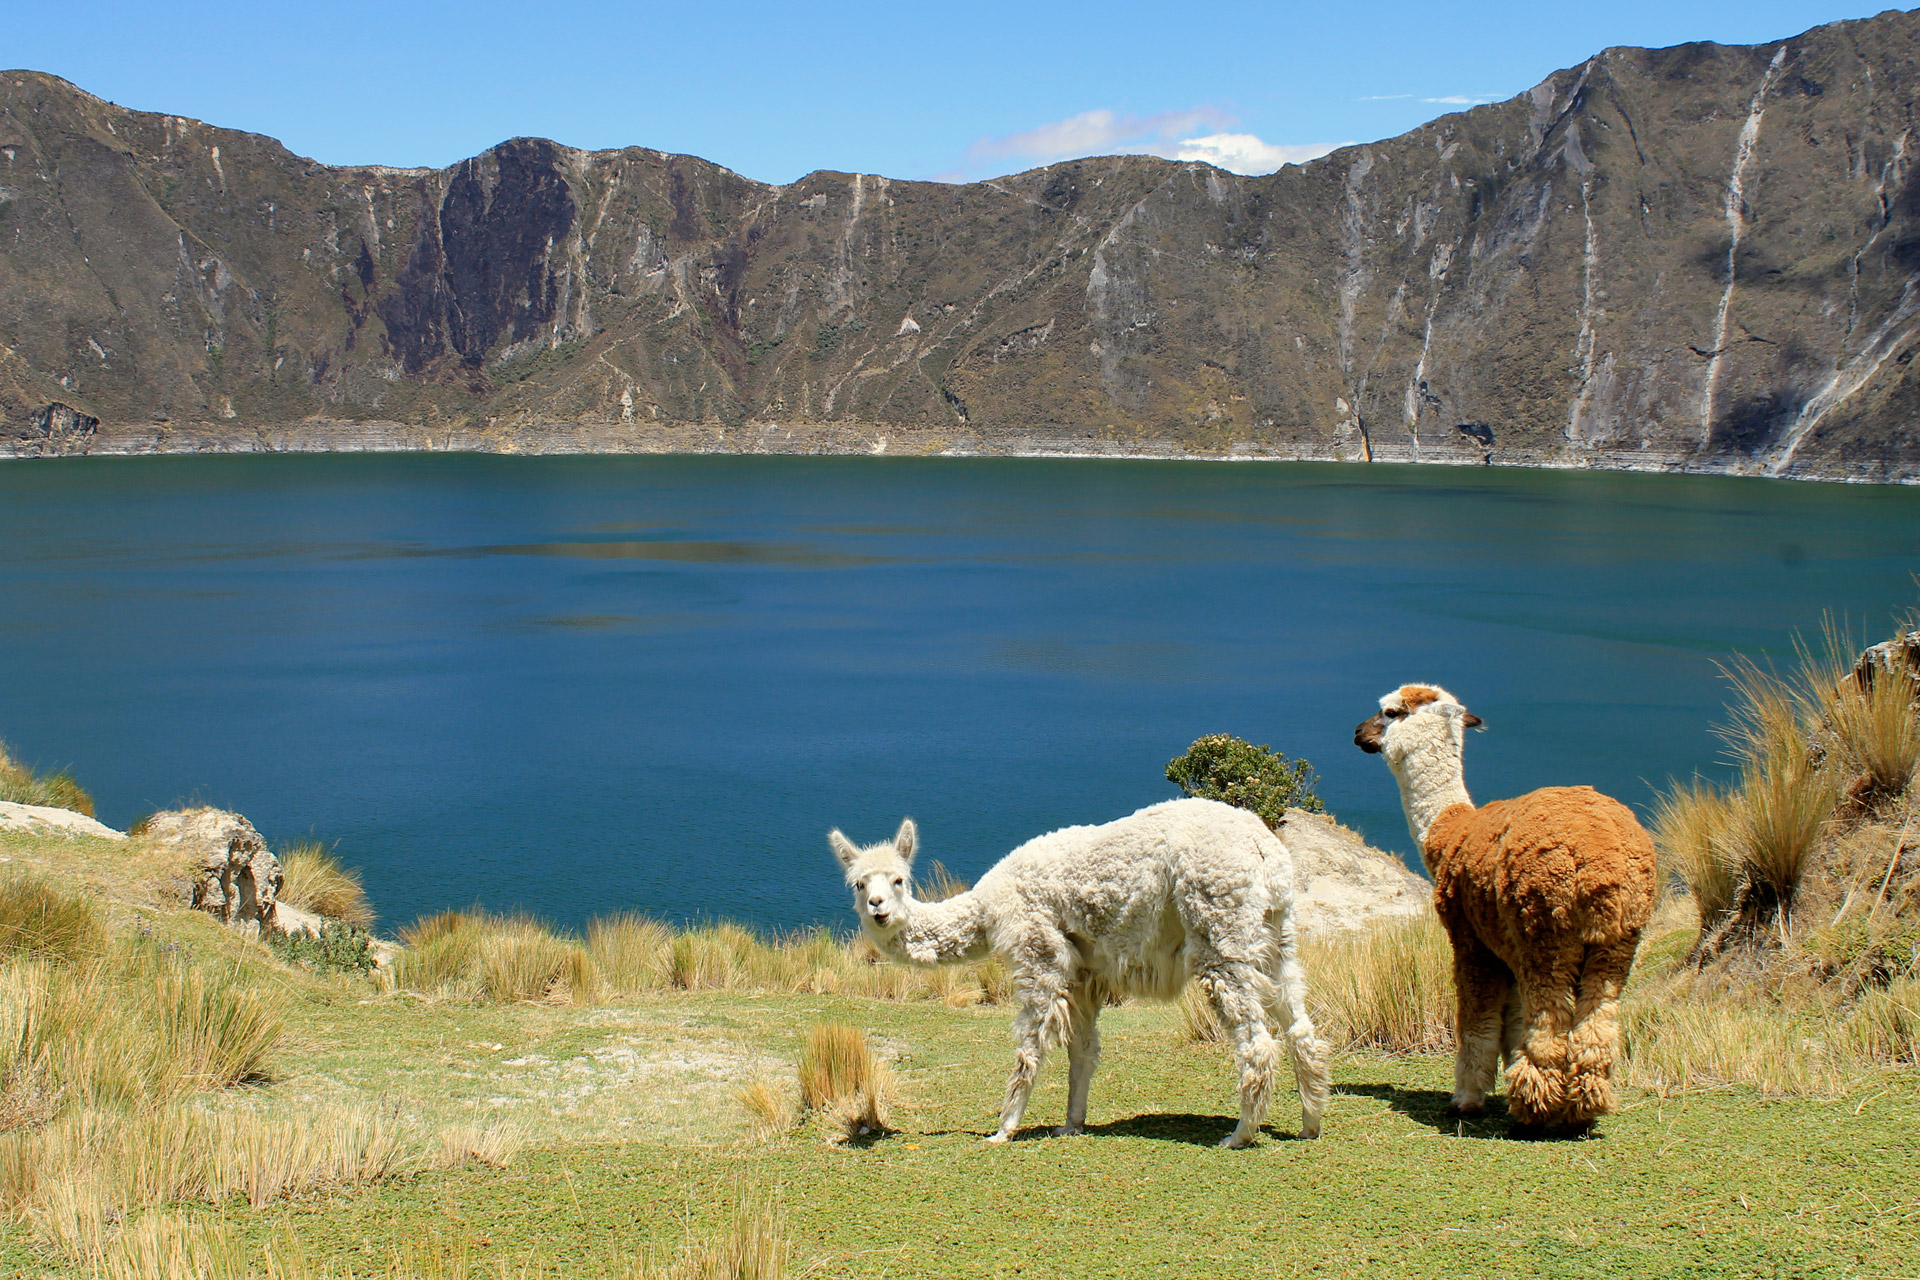 llama-watch-free-stock-photo-public-domain-pictures